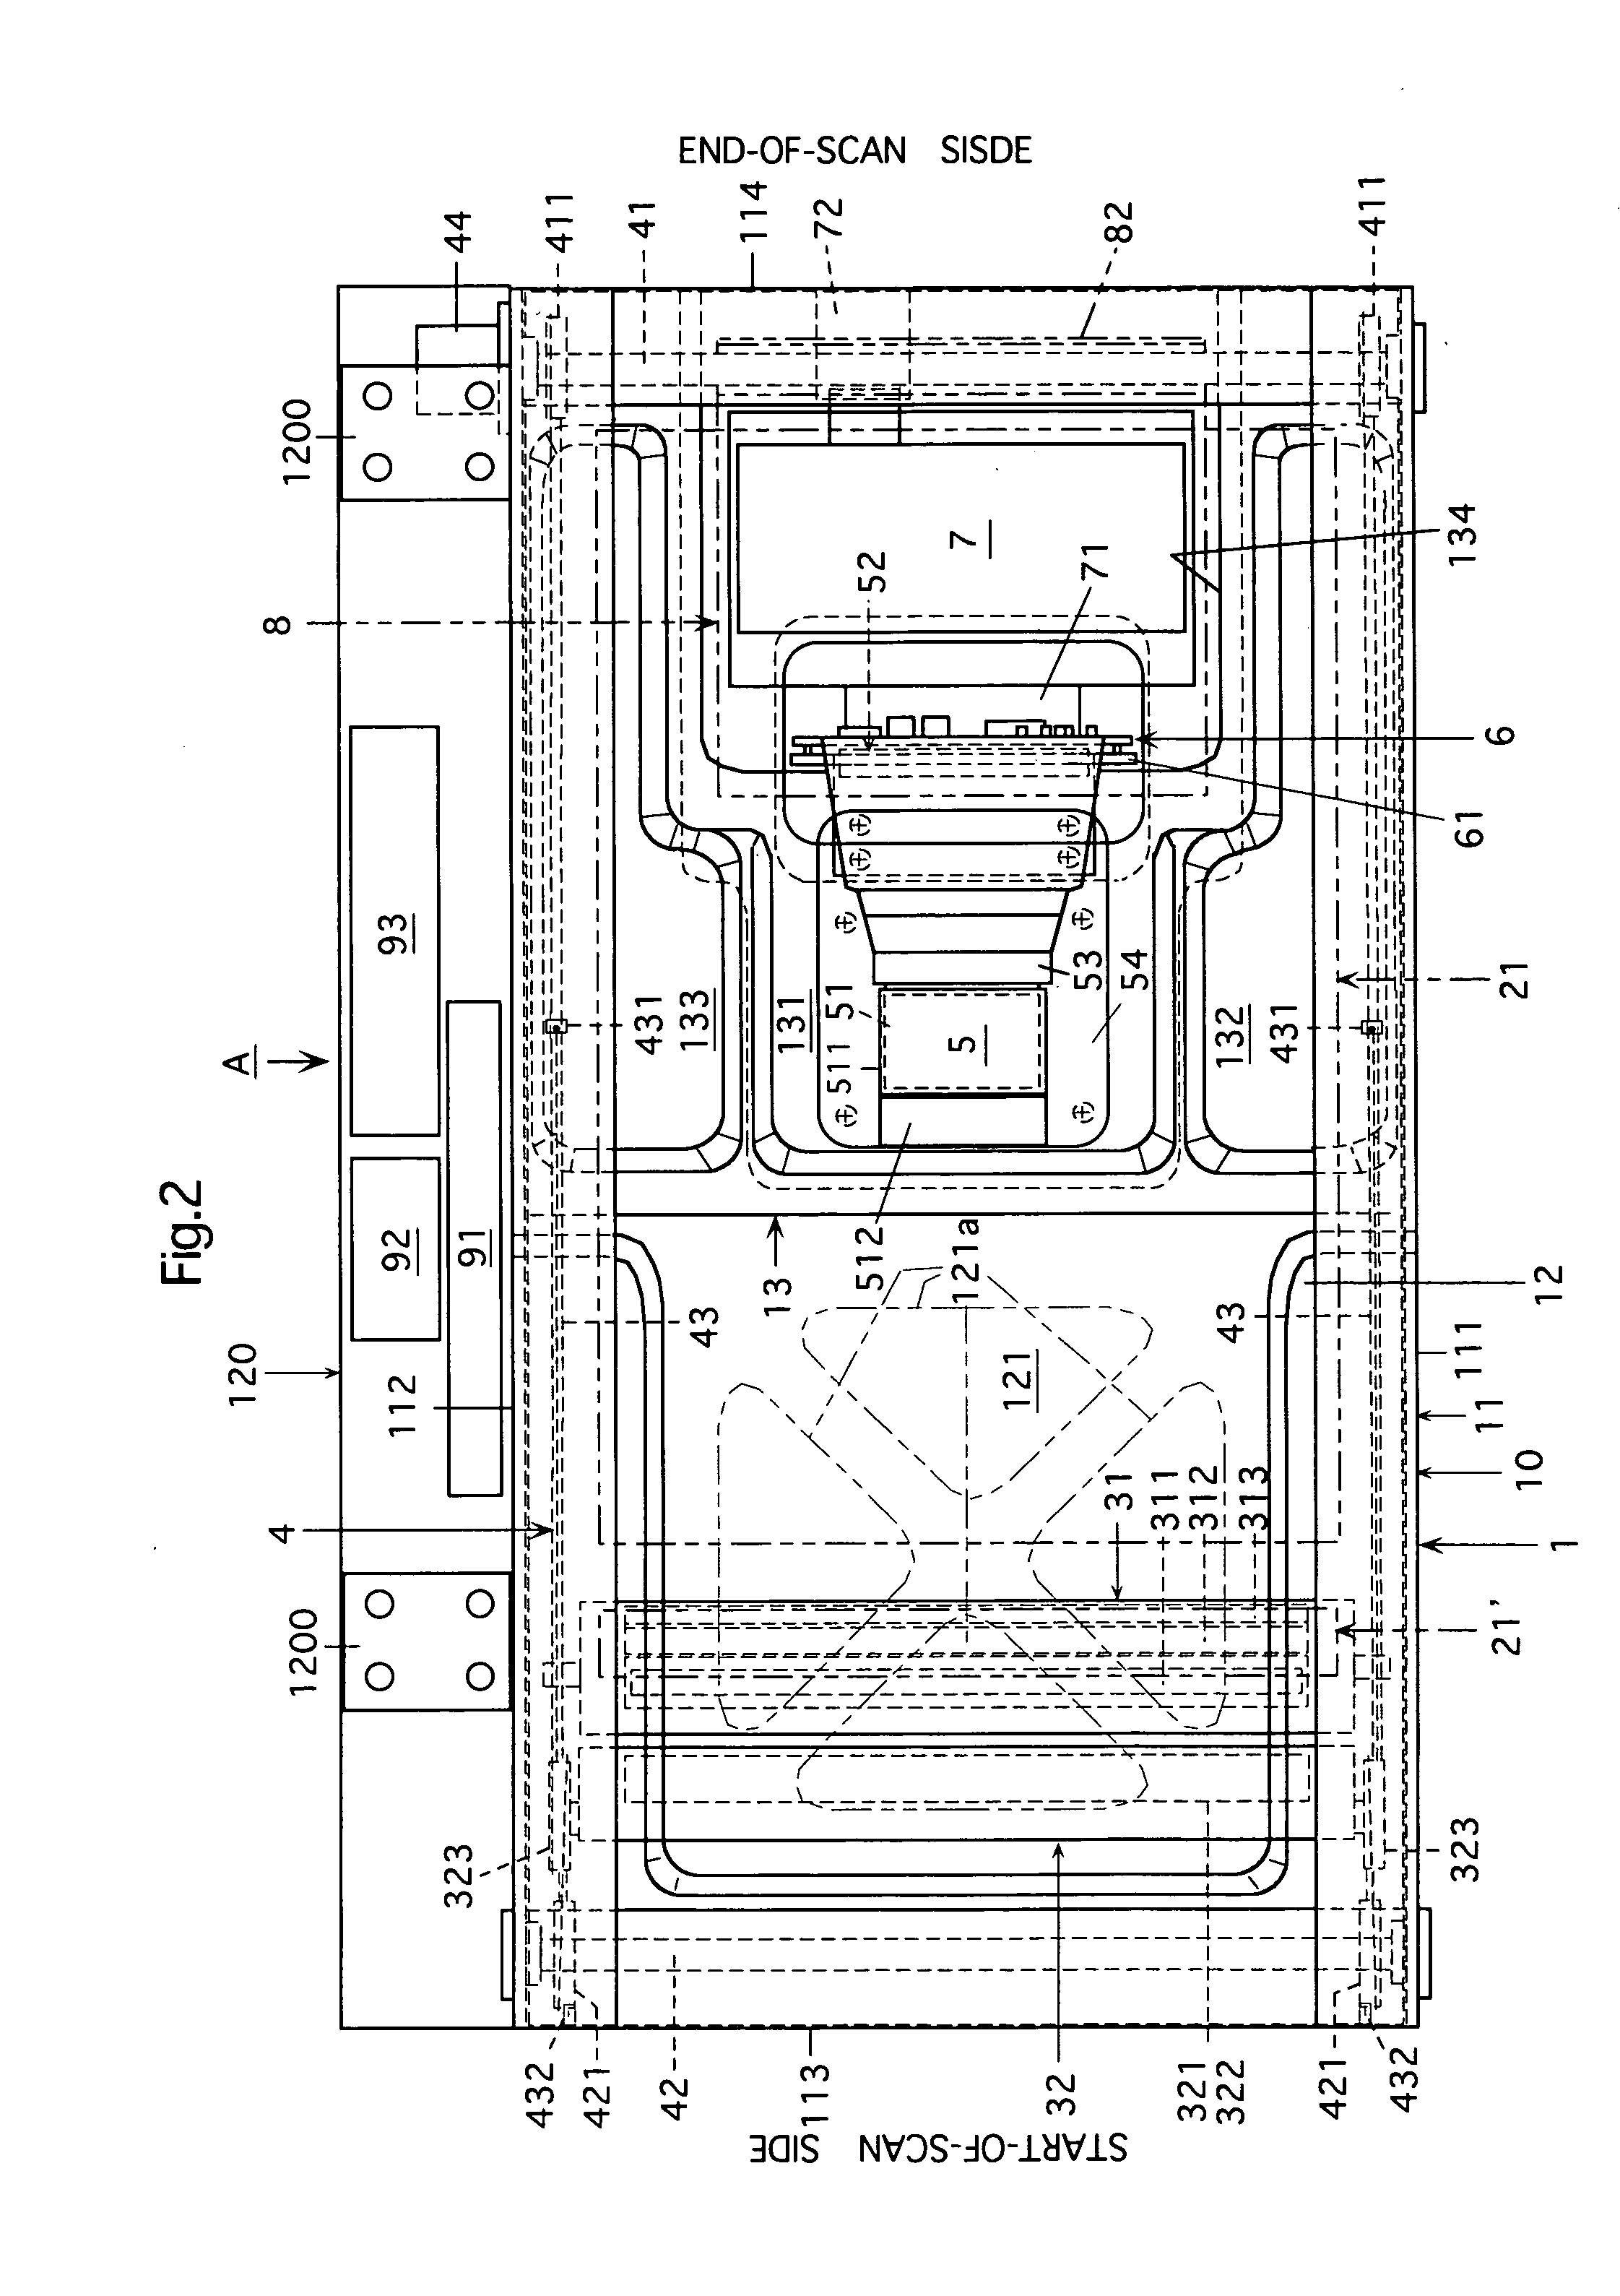 Box for image reading apparatus, image reading apparatus and image forming apparatus